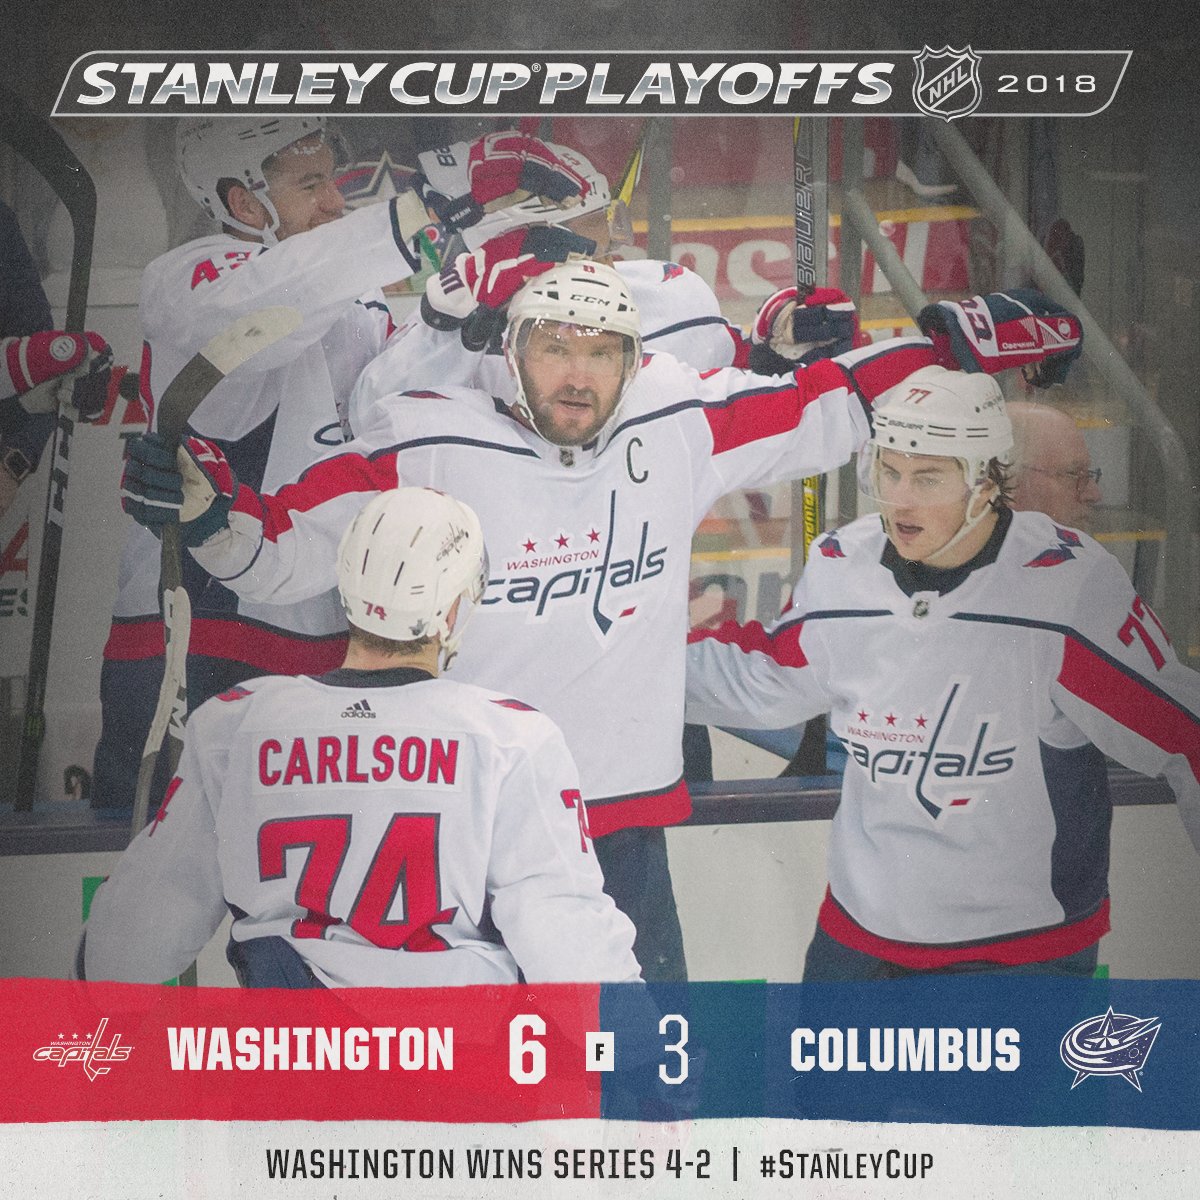 Game 6 belongs to the @Capitals.  Second Round, here they come. #StanleyCup https://t.co/kJln2MwVcY